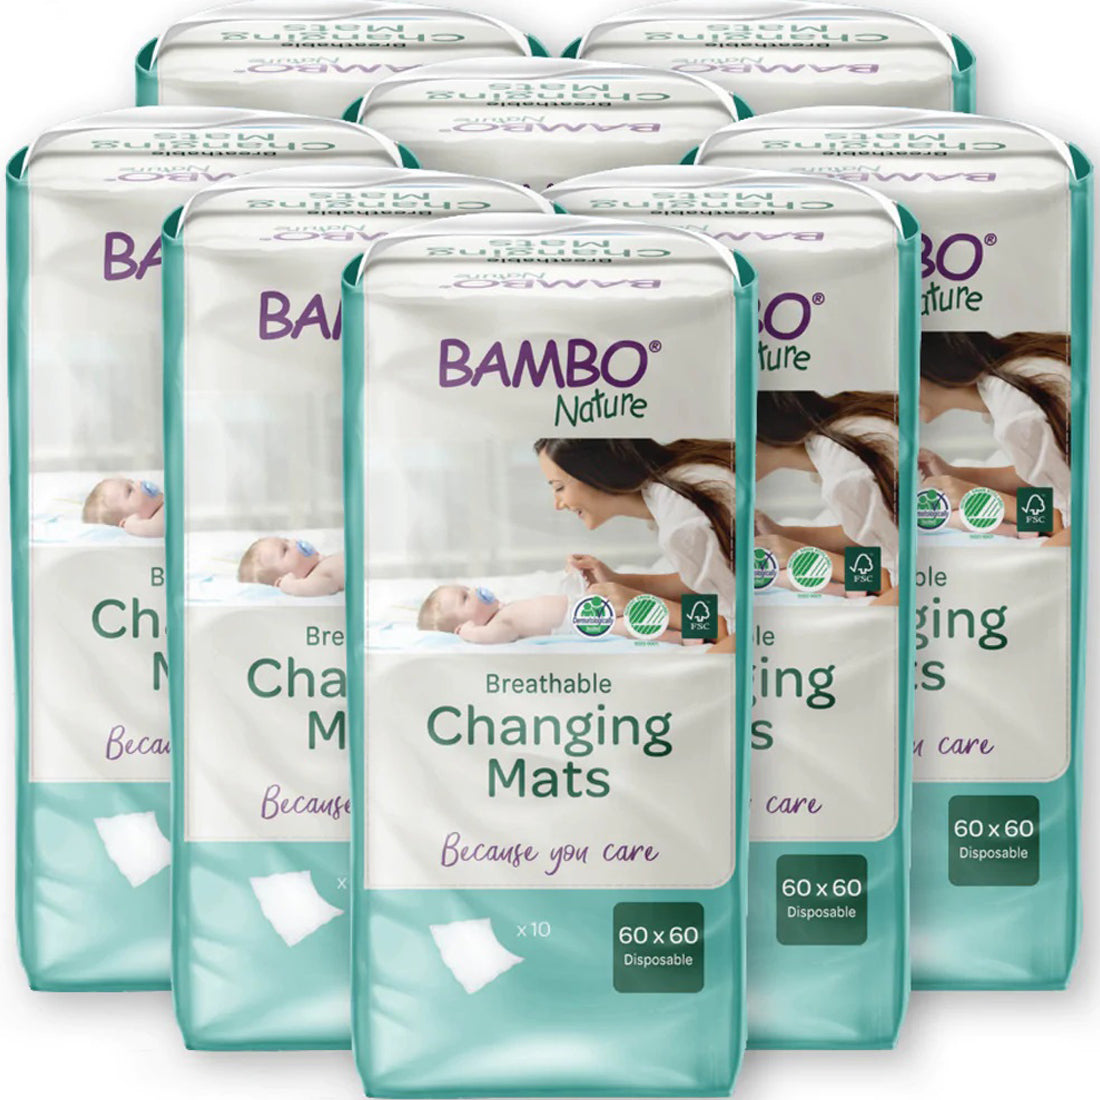 Bambo Nature Breathable Changing Mats, 24 Inch Square